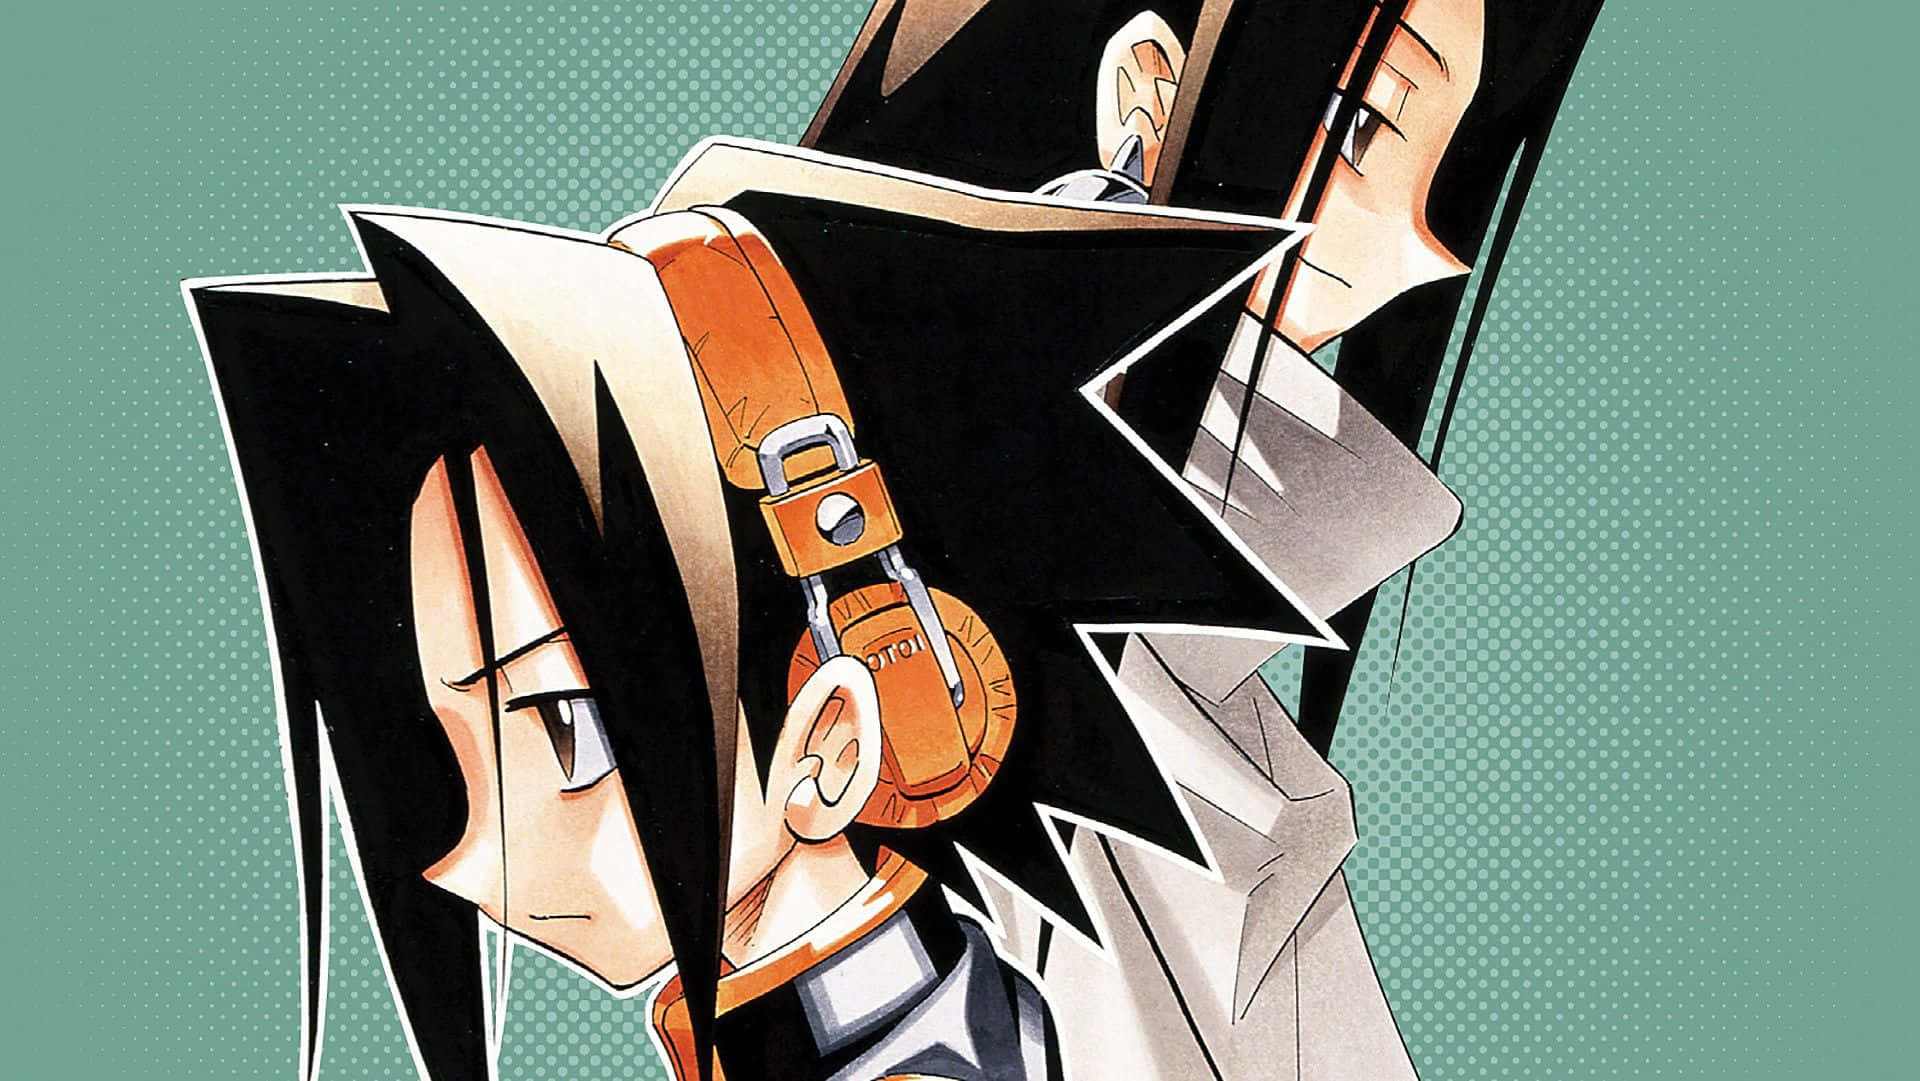 "Take your powers to the next level with the Shaman King."